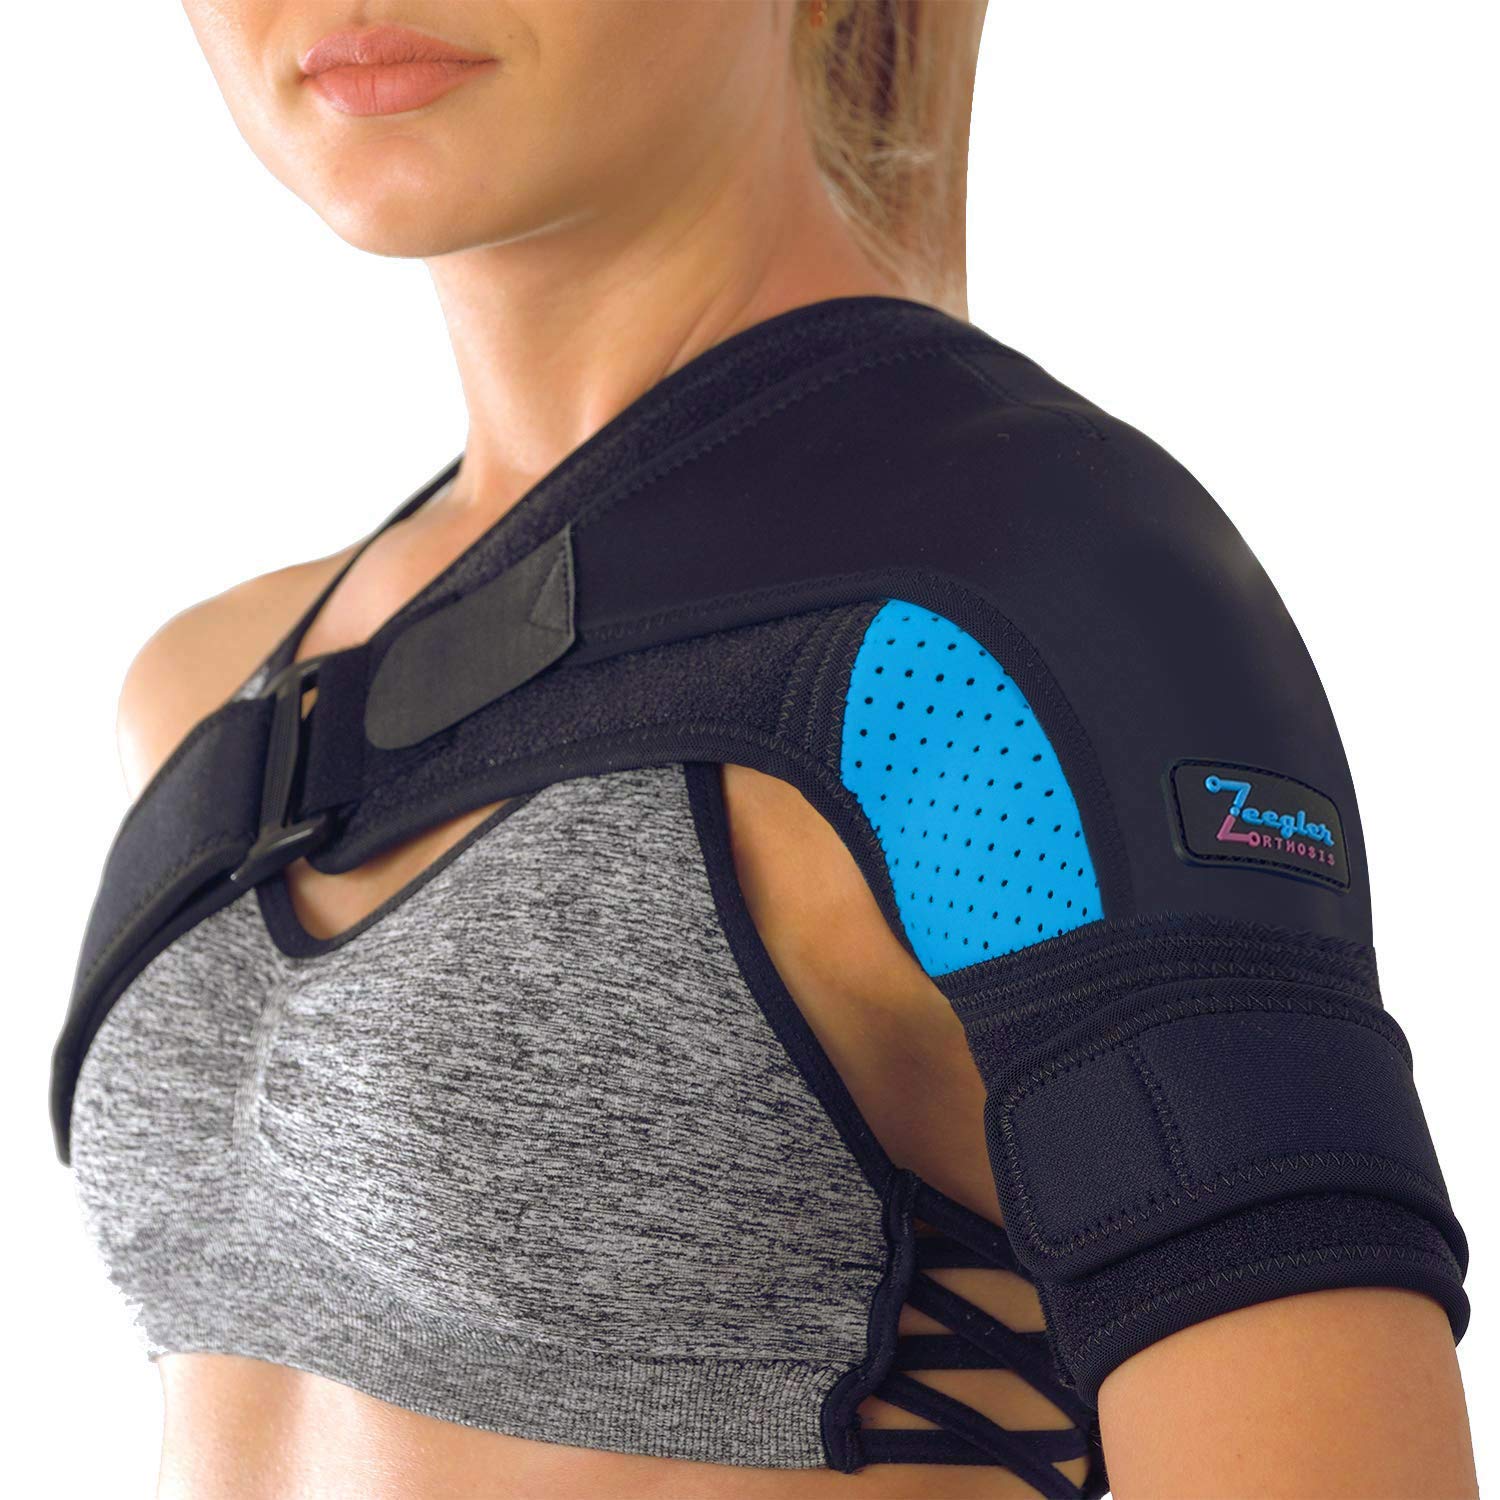 Shoulder Brace for Women or Men, Shoulder Support for Torn Rotator Cuff,  Compression Sleeve for Pain Relief, Stability Brace and Shoulder  Immobilizer